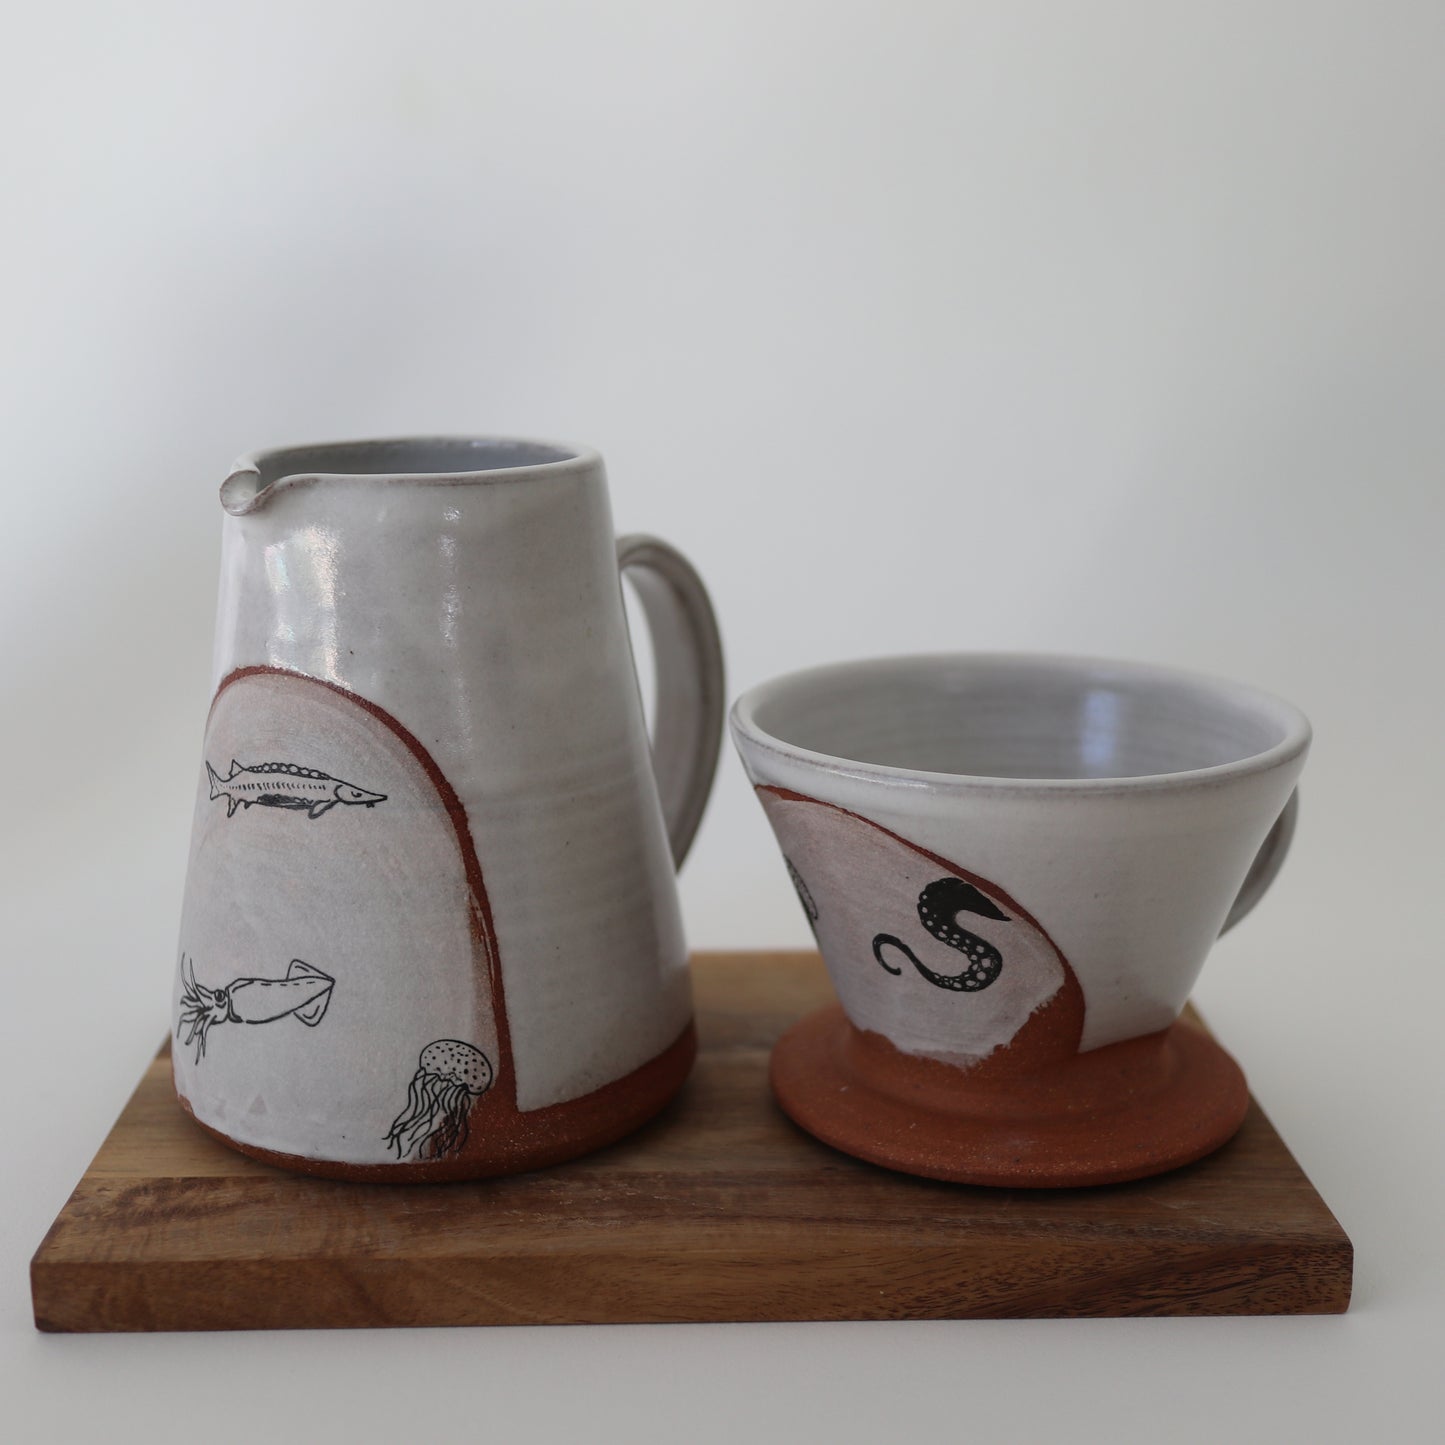 Pour over coffee dripper and pitcher set with sea illustrations